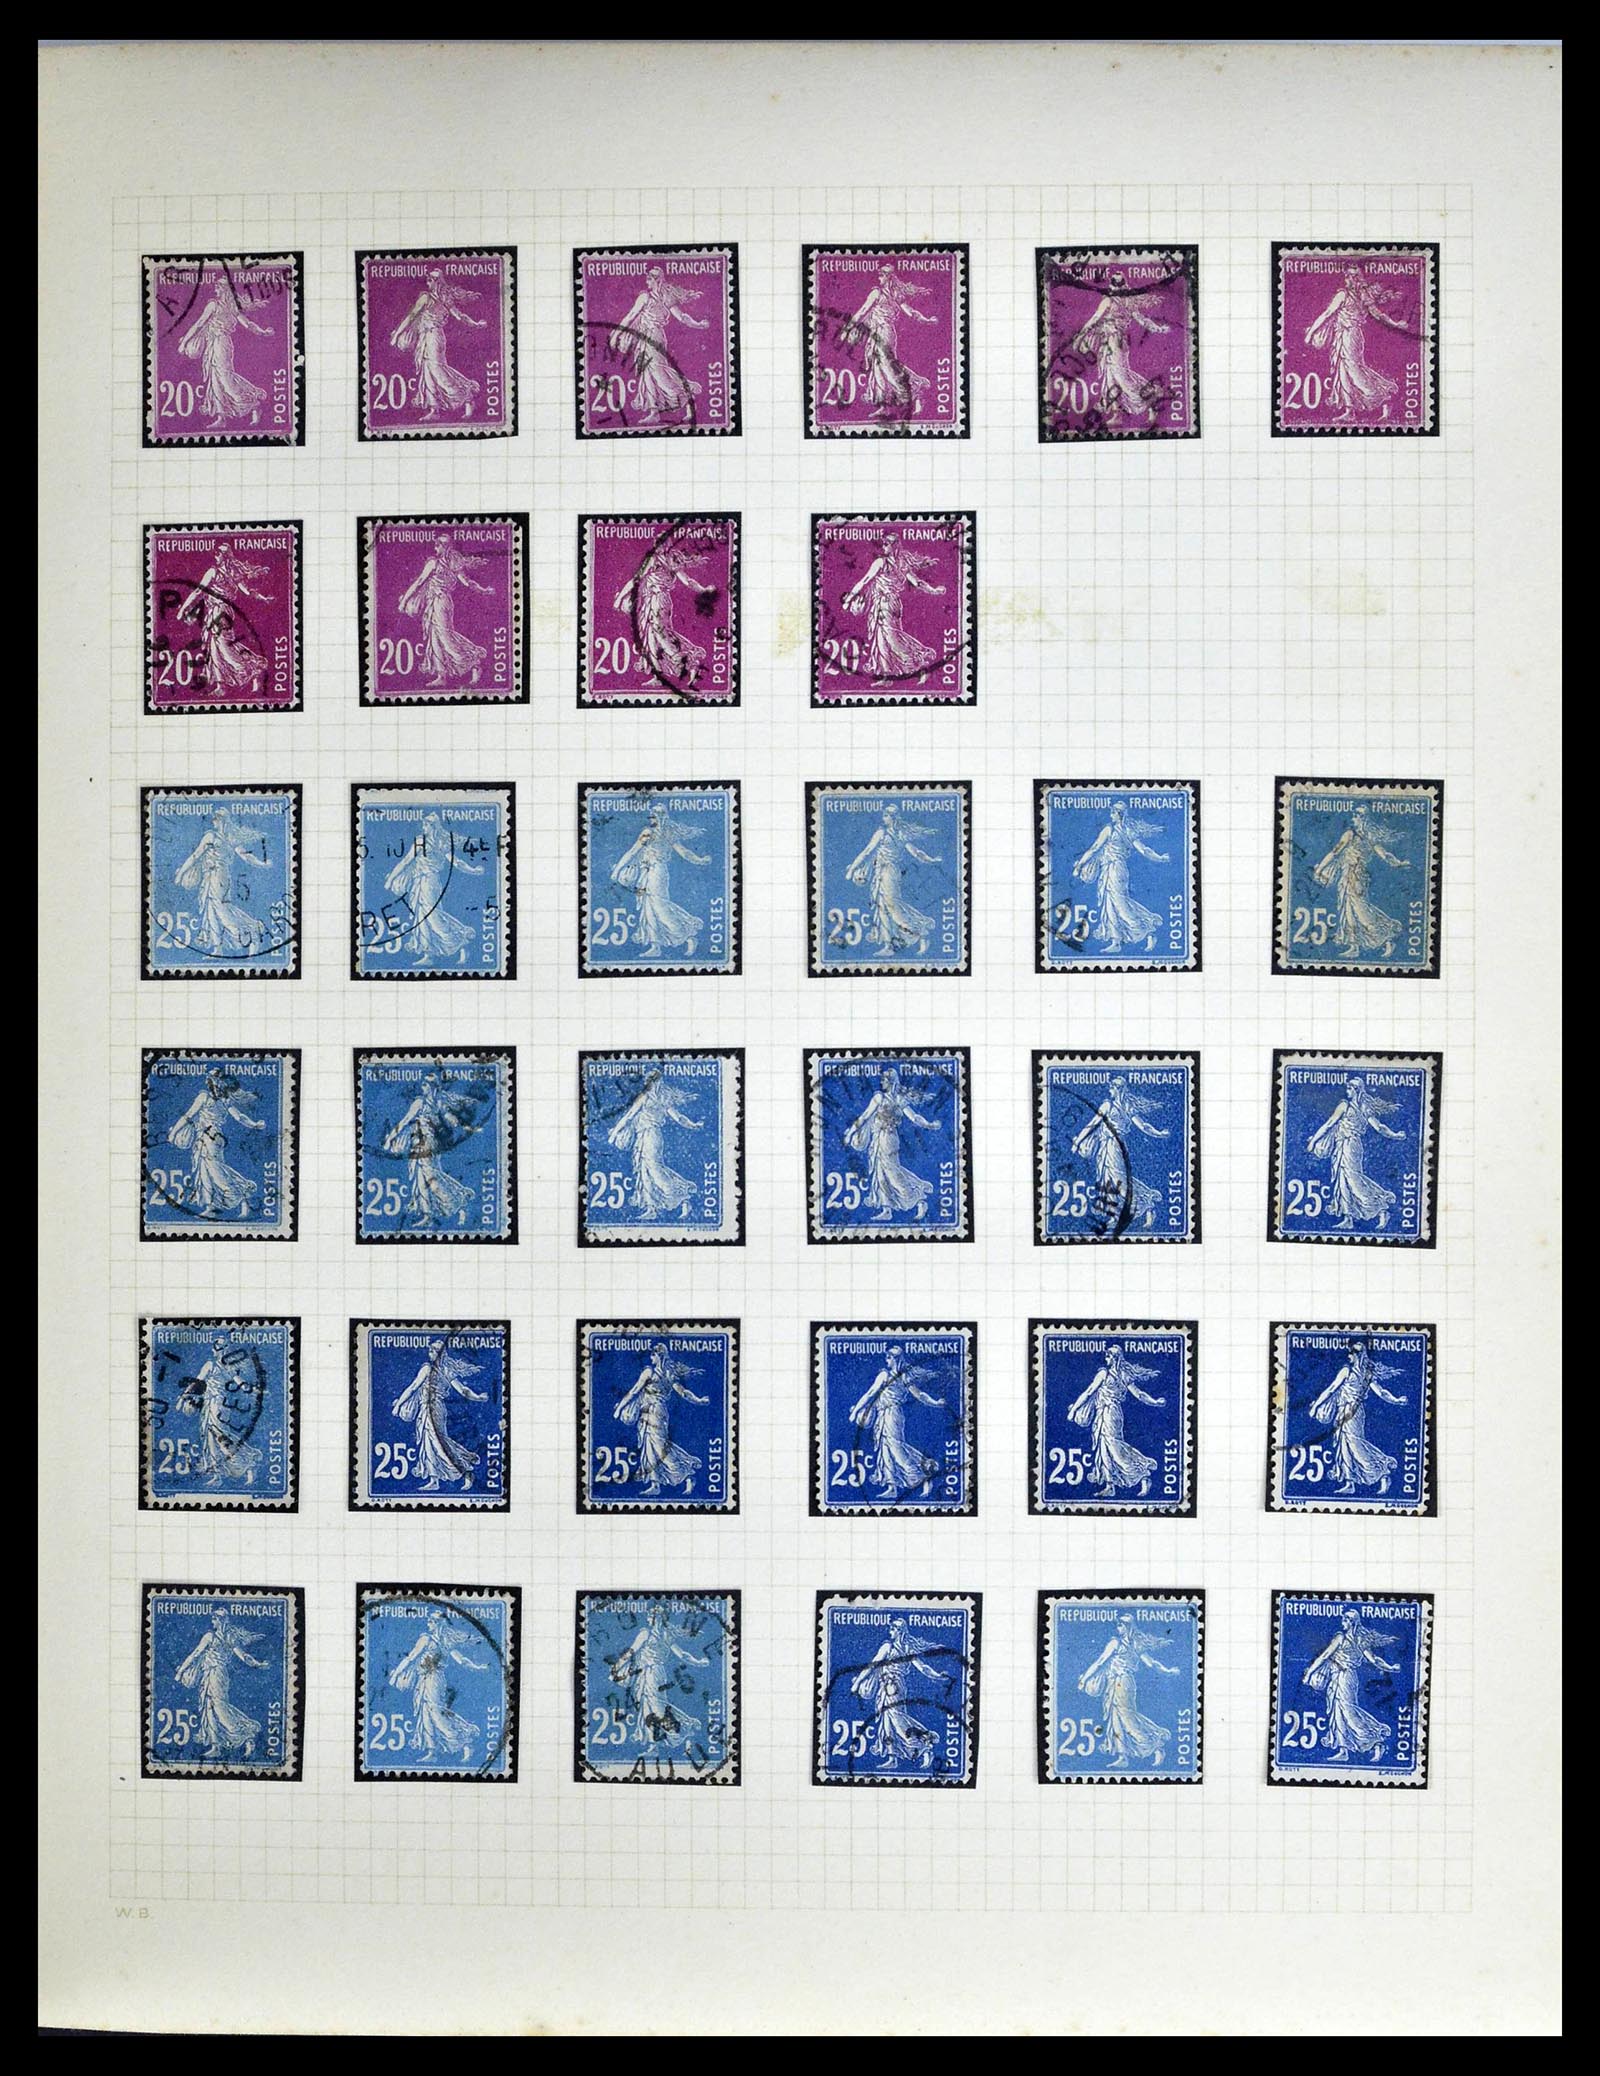 39329 0045 - Stamp collection 39329 France Semeuse.